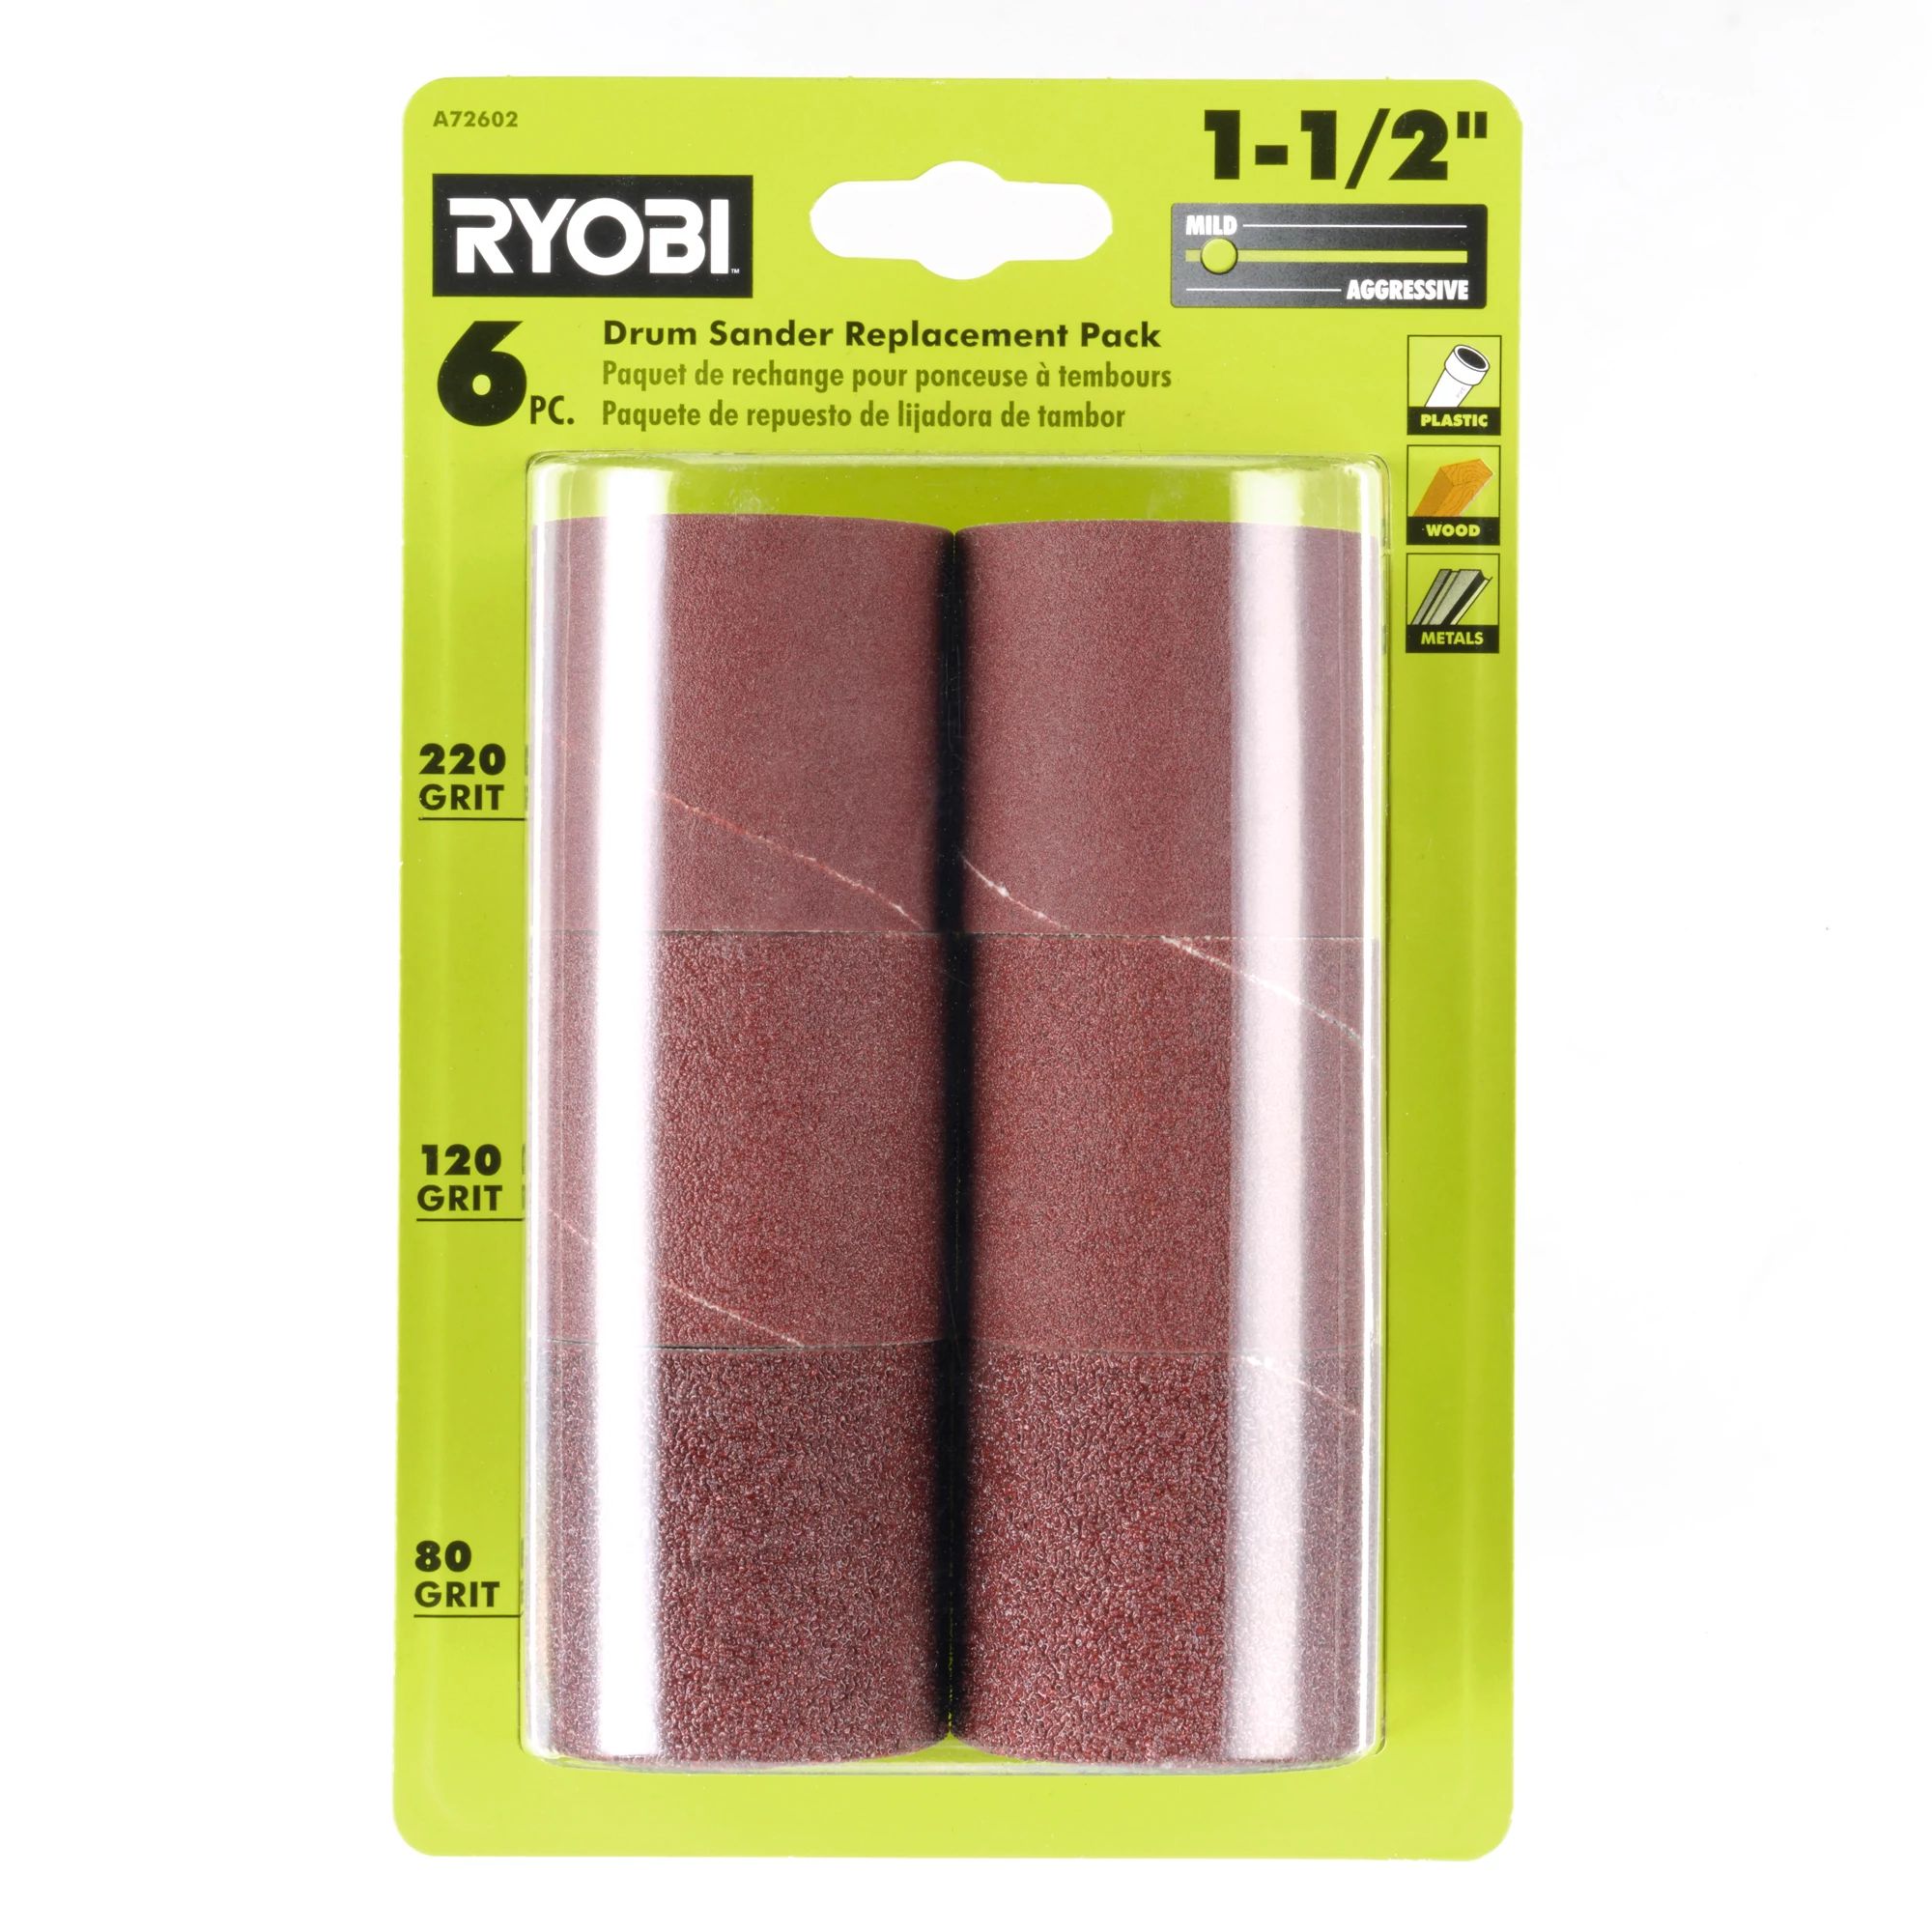 80, 120 and 220 Grit Sanding Sleeves 